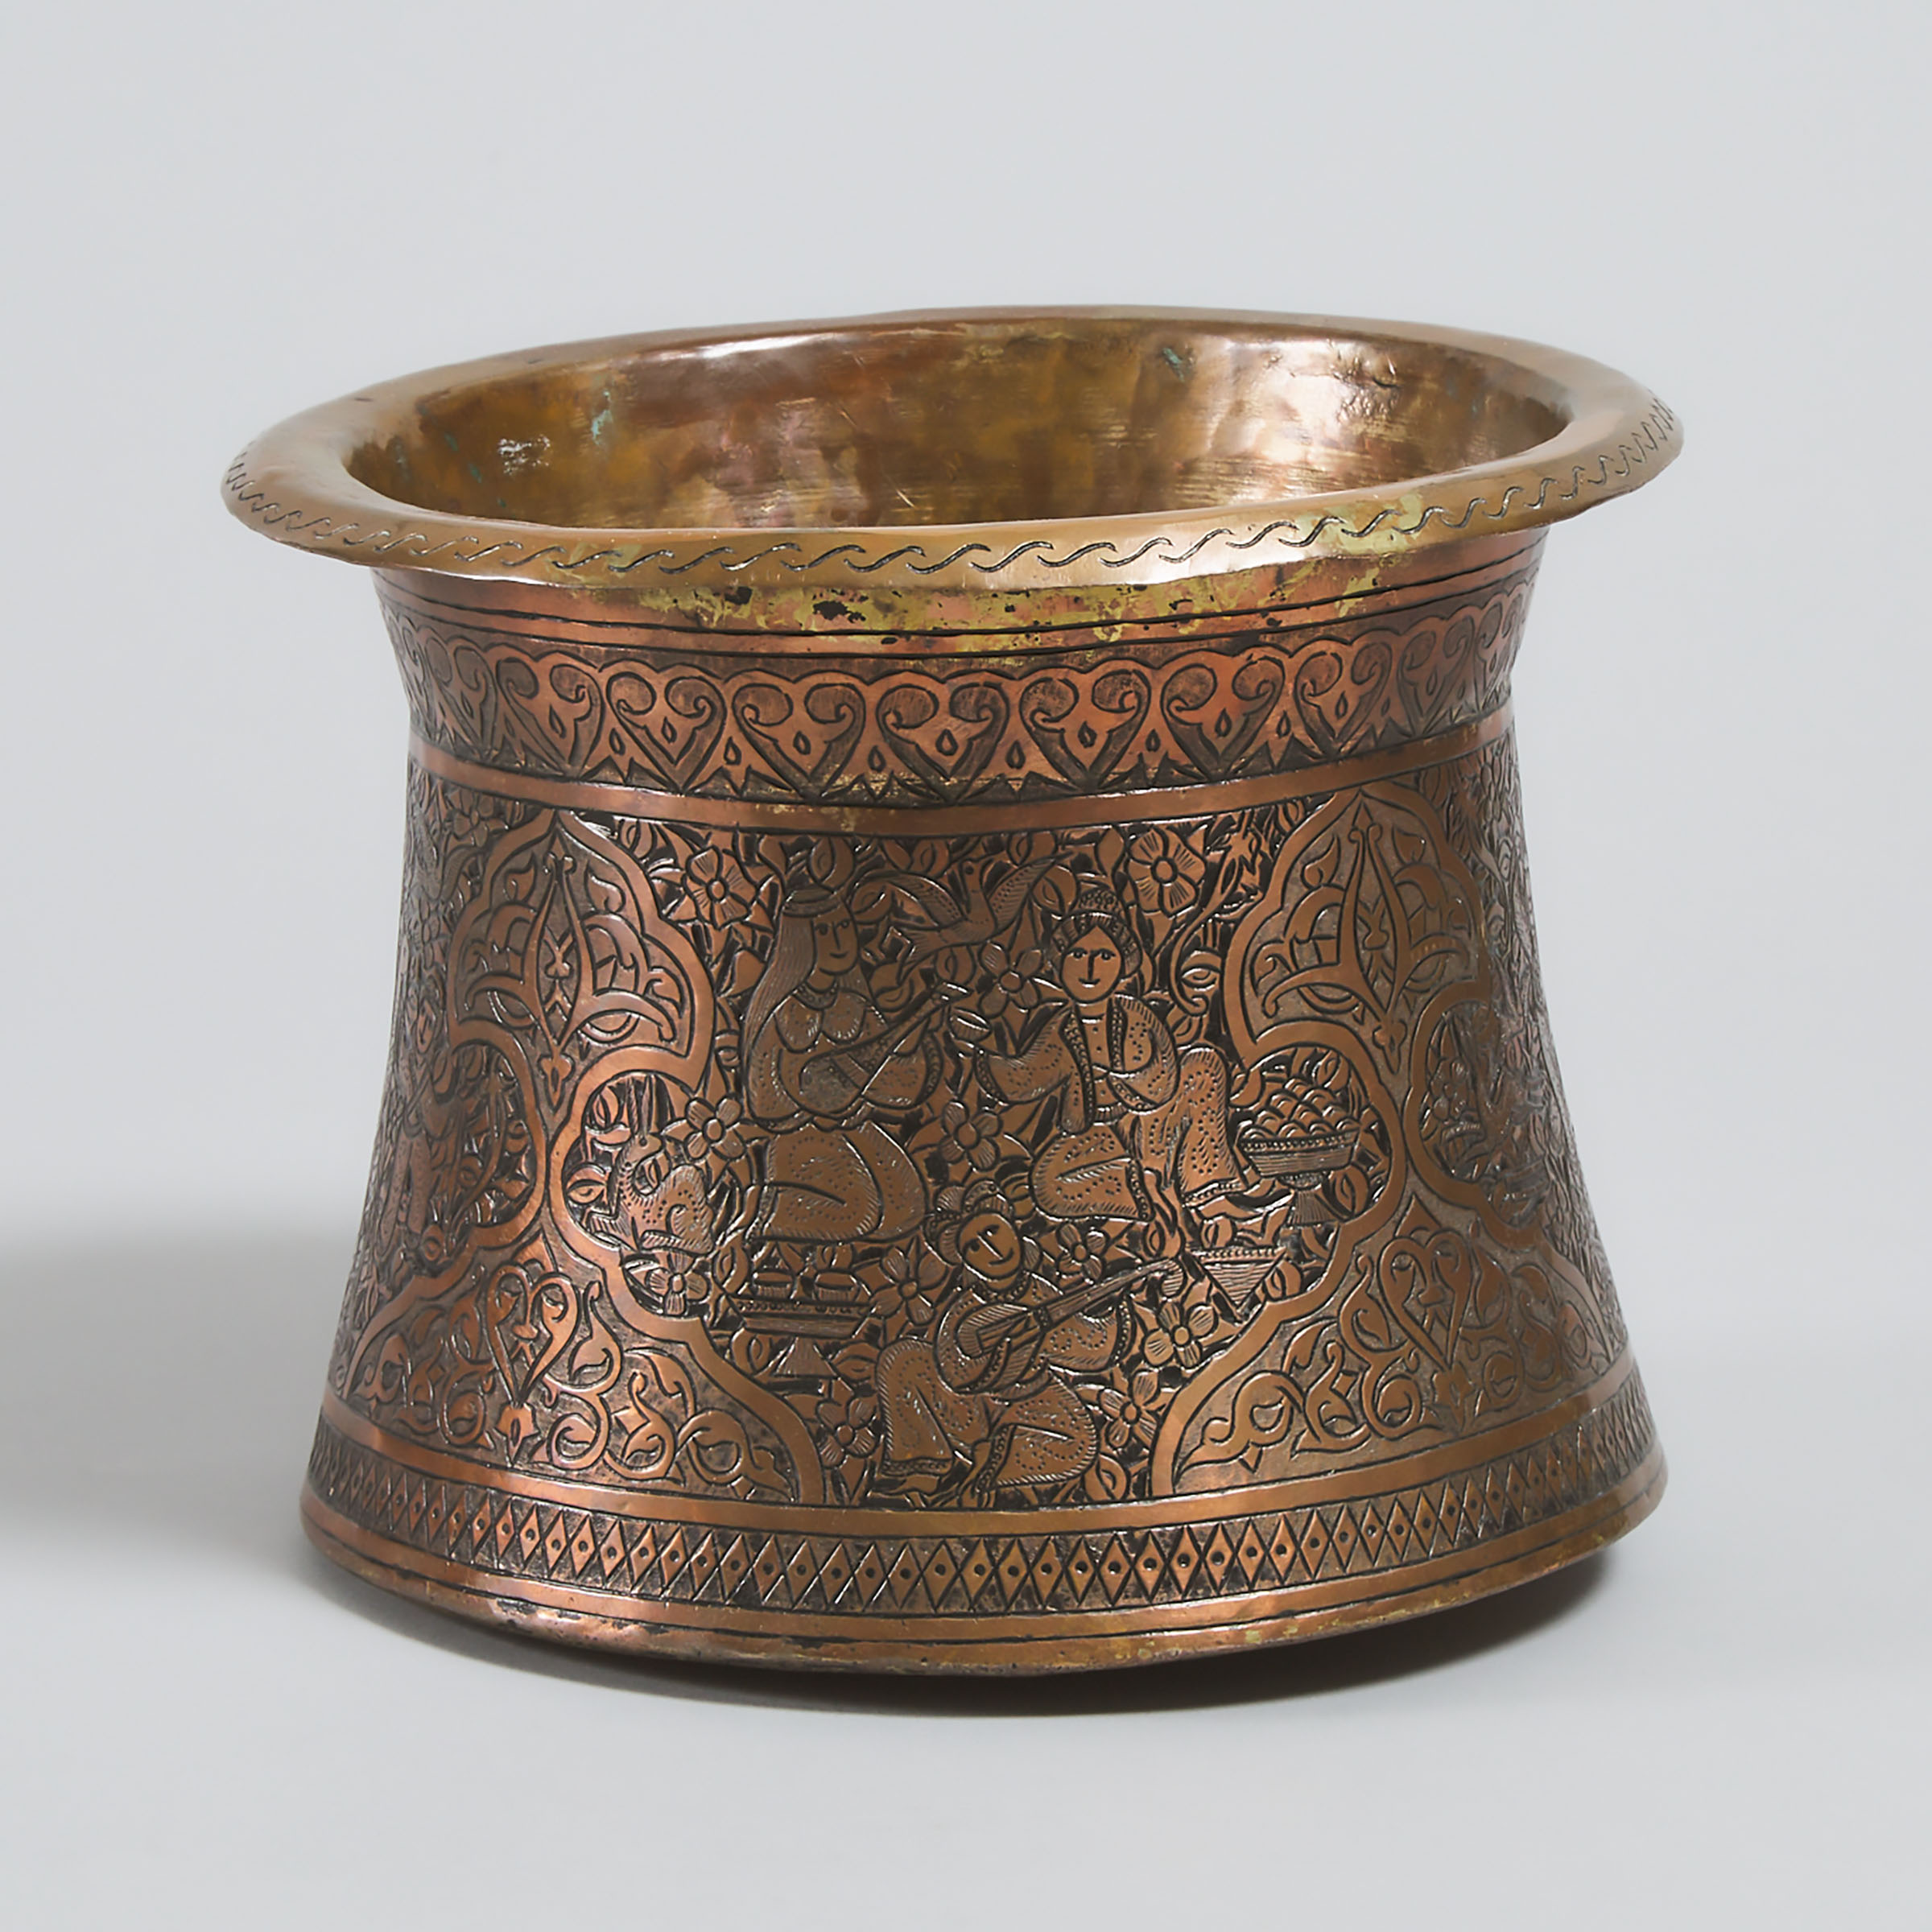 Syrian Chased Copper Pot, 19th century